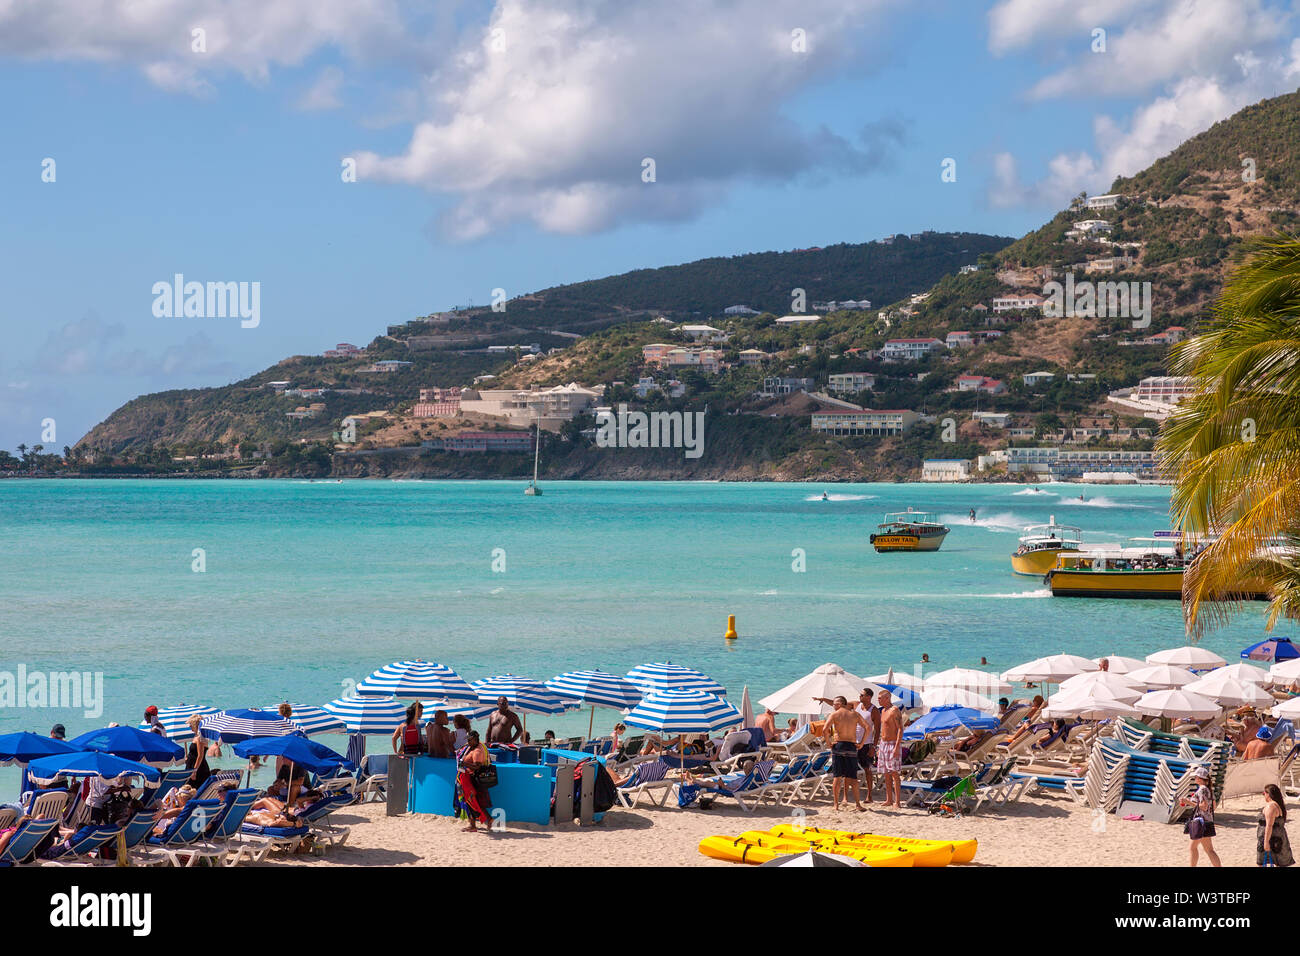 Sint Maarten, Kingdom of the Netherlands - January 19, 2011: Crowded beach in Philipsburg, capital city of Sint Maarten, is an attraction for visitors Stock Photo